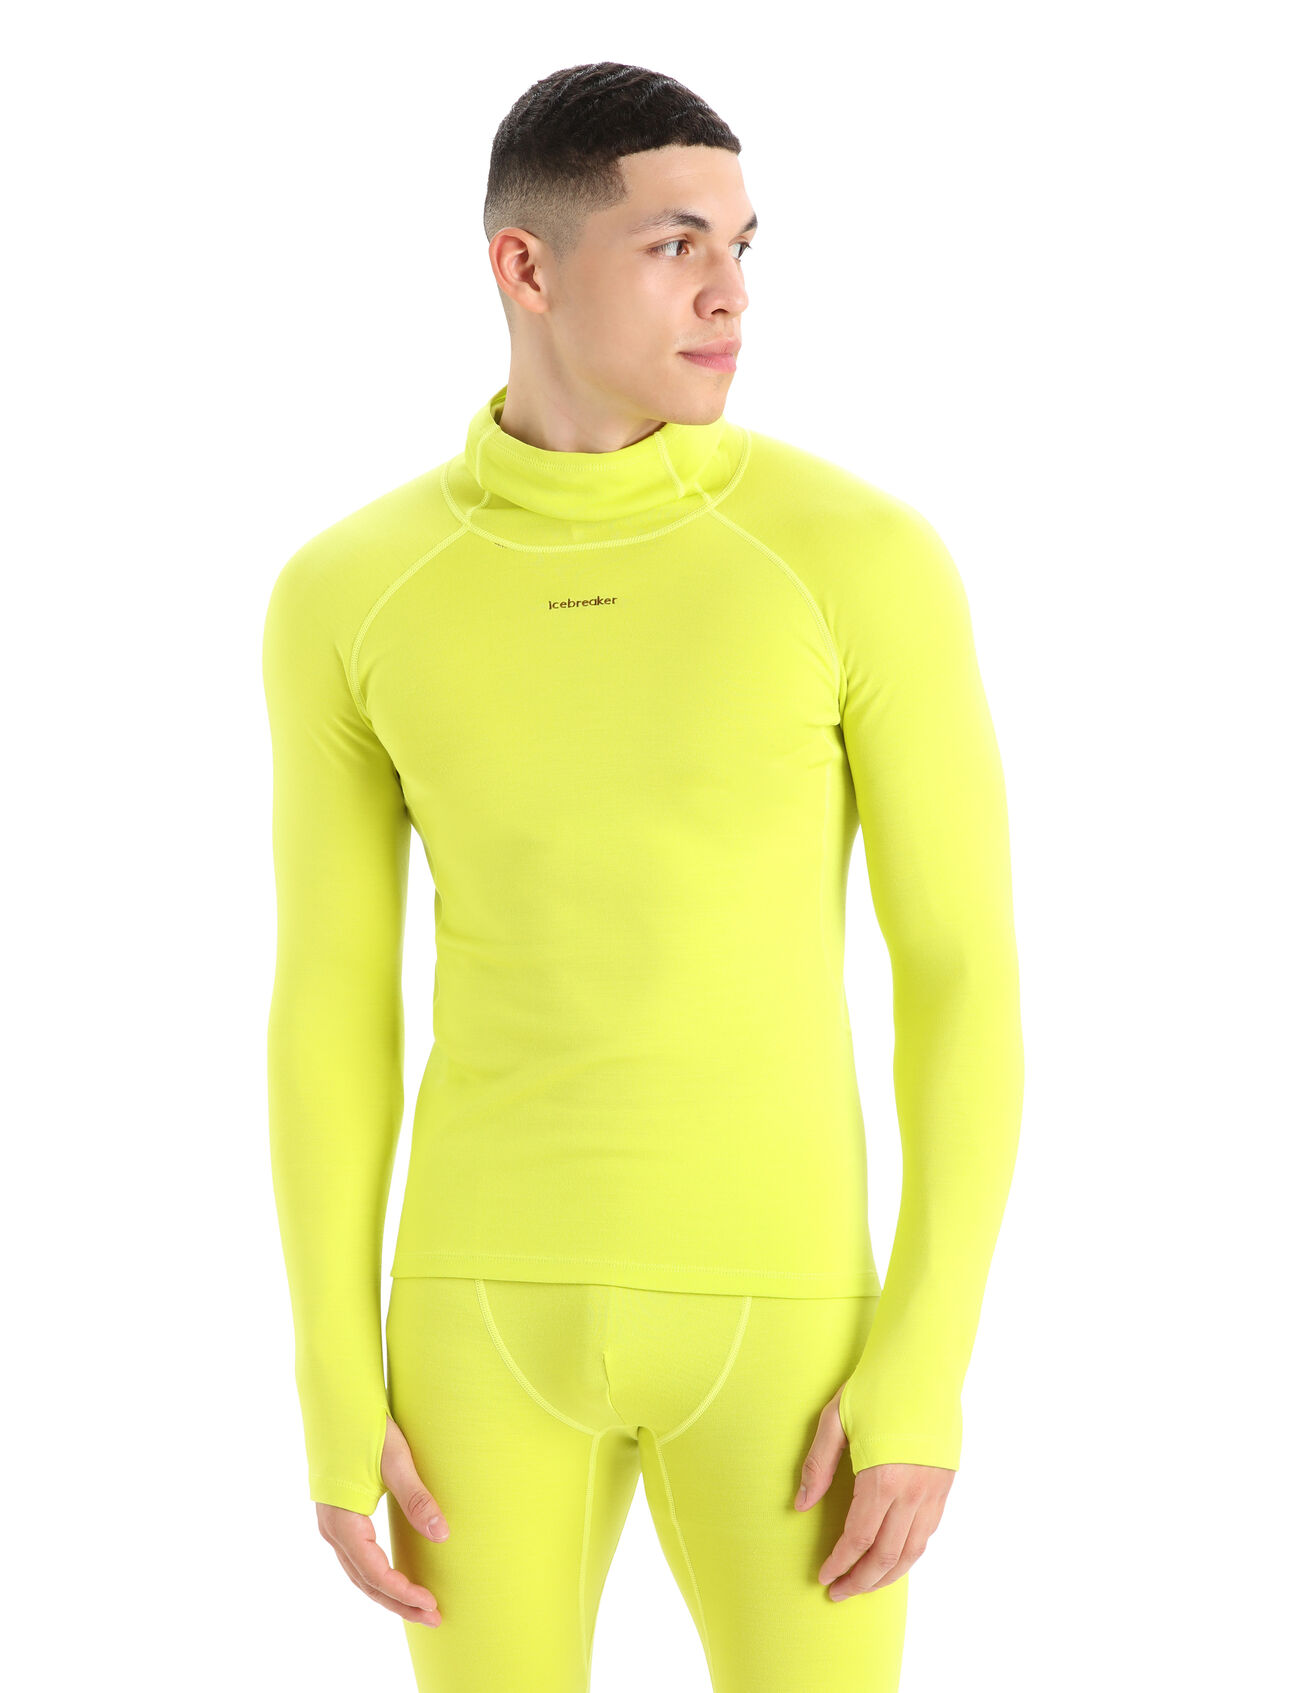 Mens 300 MerinoFine™ Long Sleeve Roll Neck Thermal Top A premium, slim-fit base layer made with luxuriously soft 15.5 micron merino wool fibers and a high-neck design for added protection, the MerinoFine™ Long Sleeve Roll Neck is at the intersection of comfort and performance.